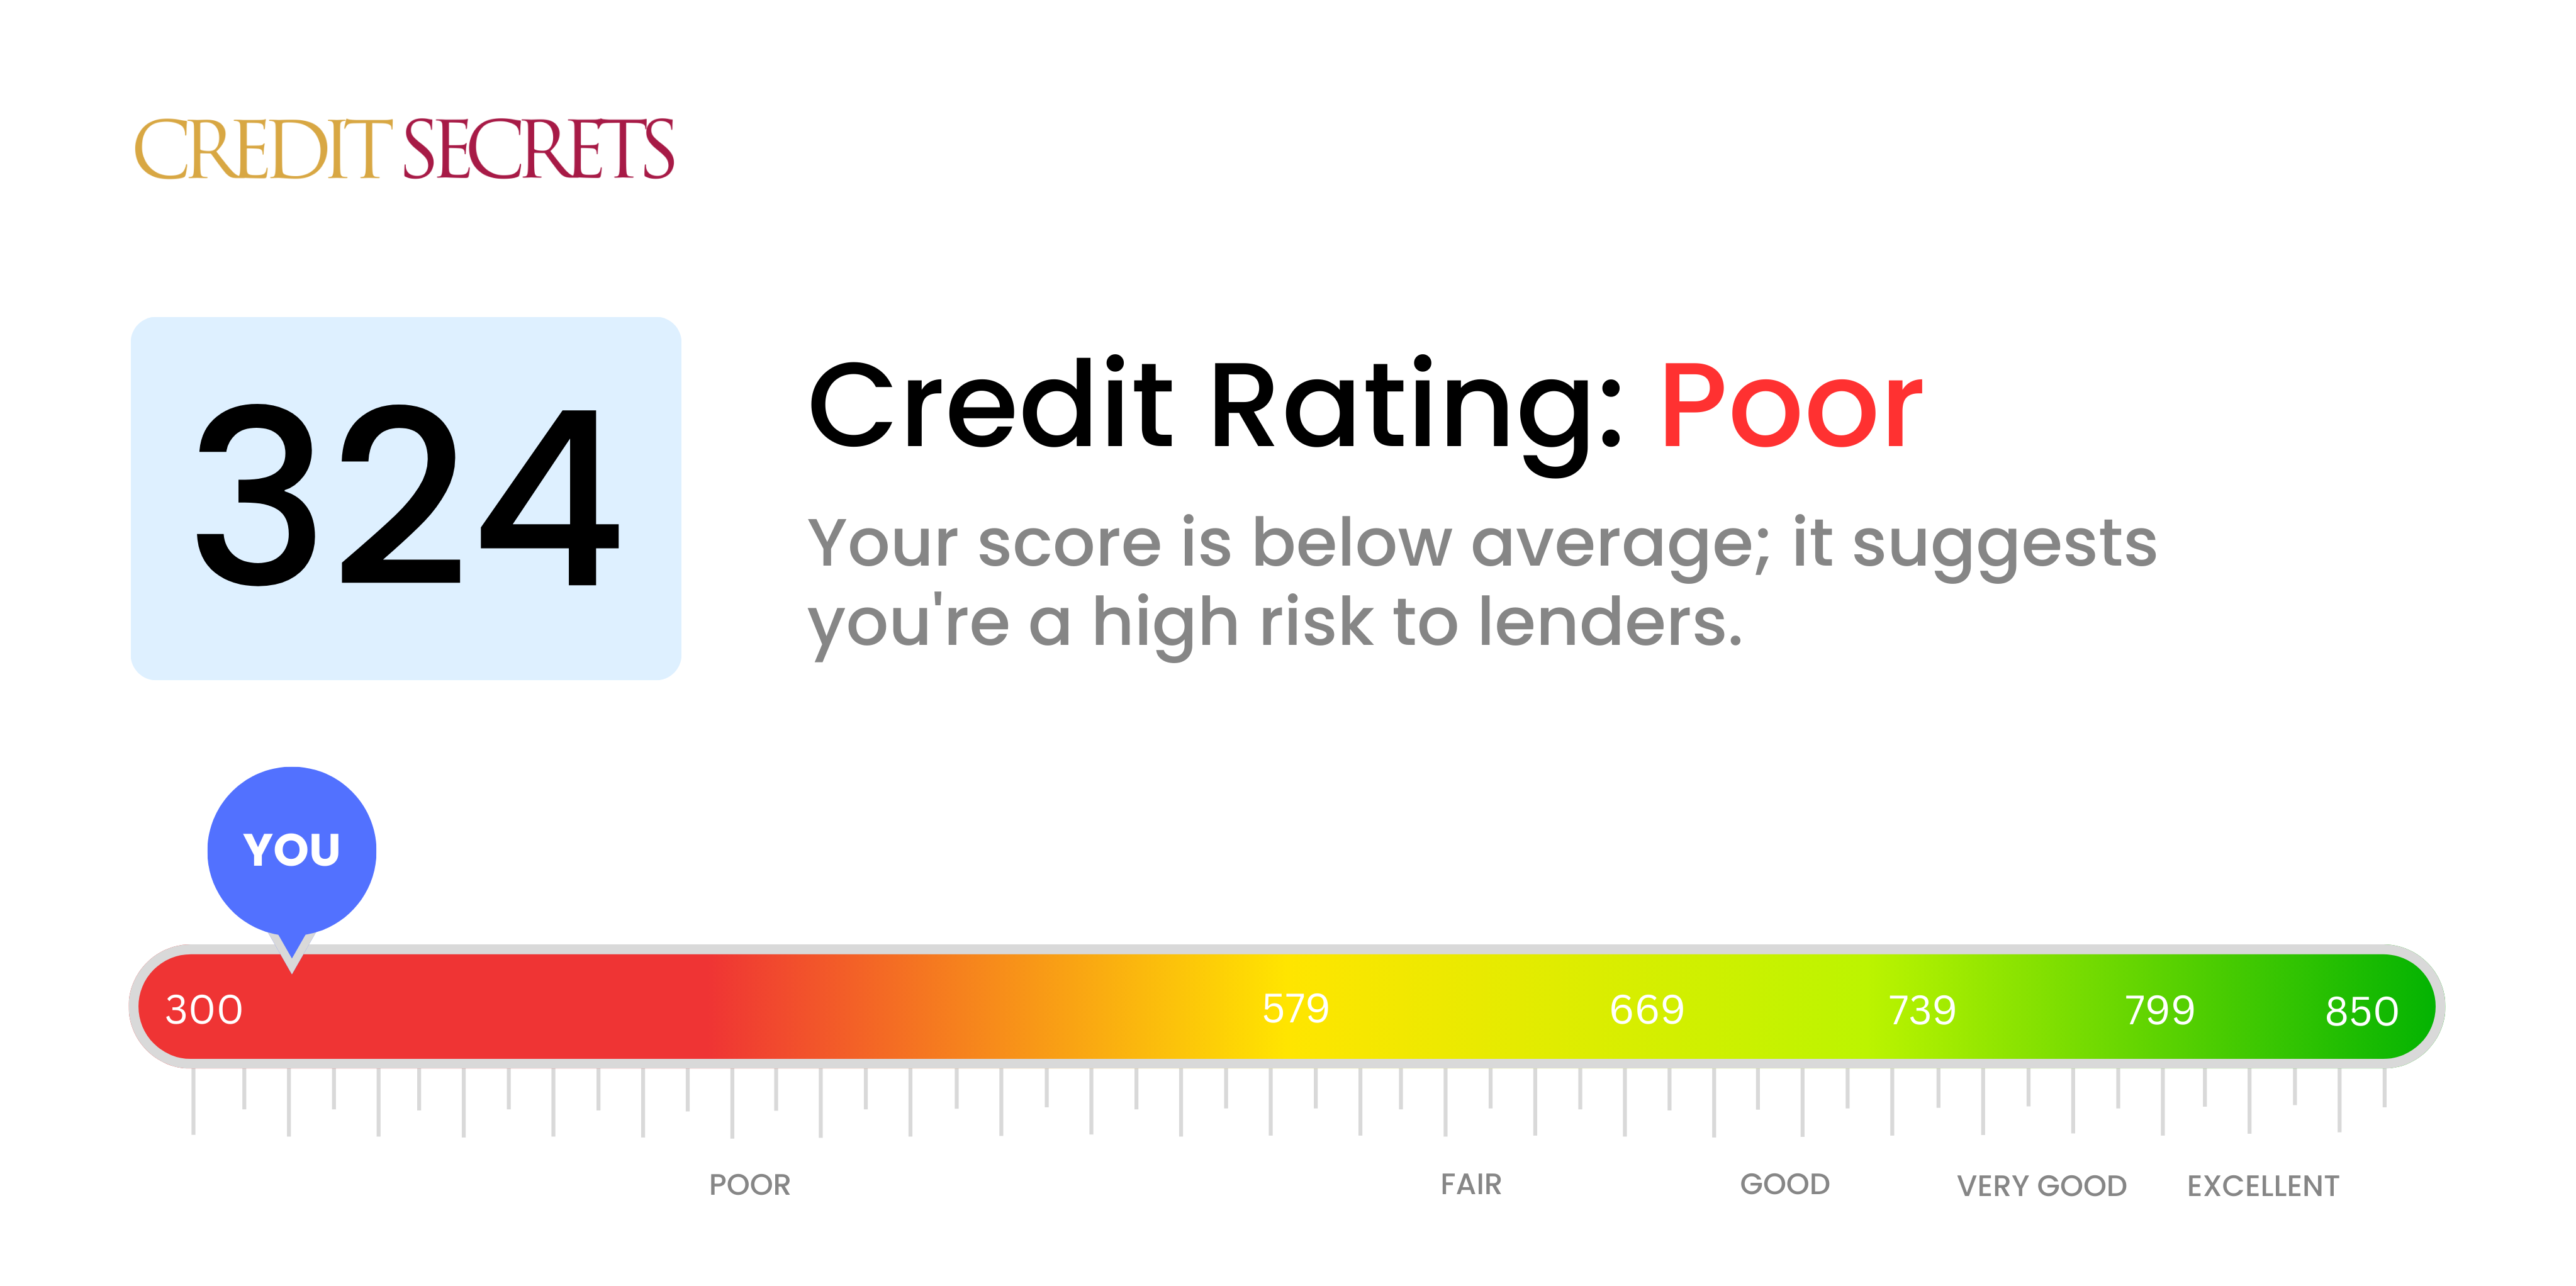 Is 324 a good credit score?